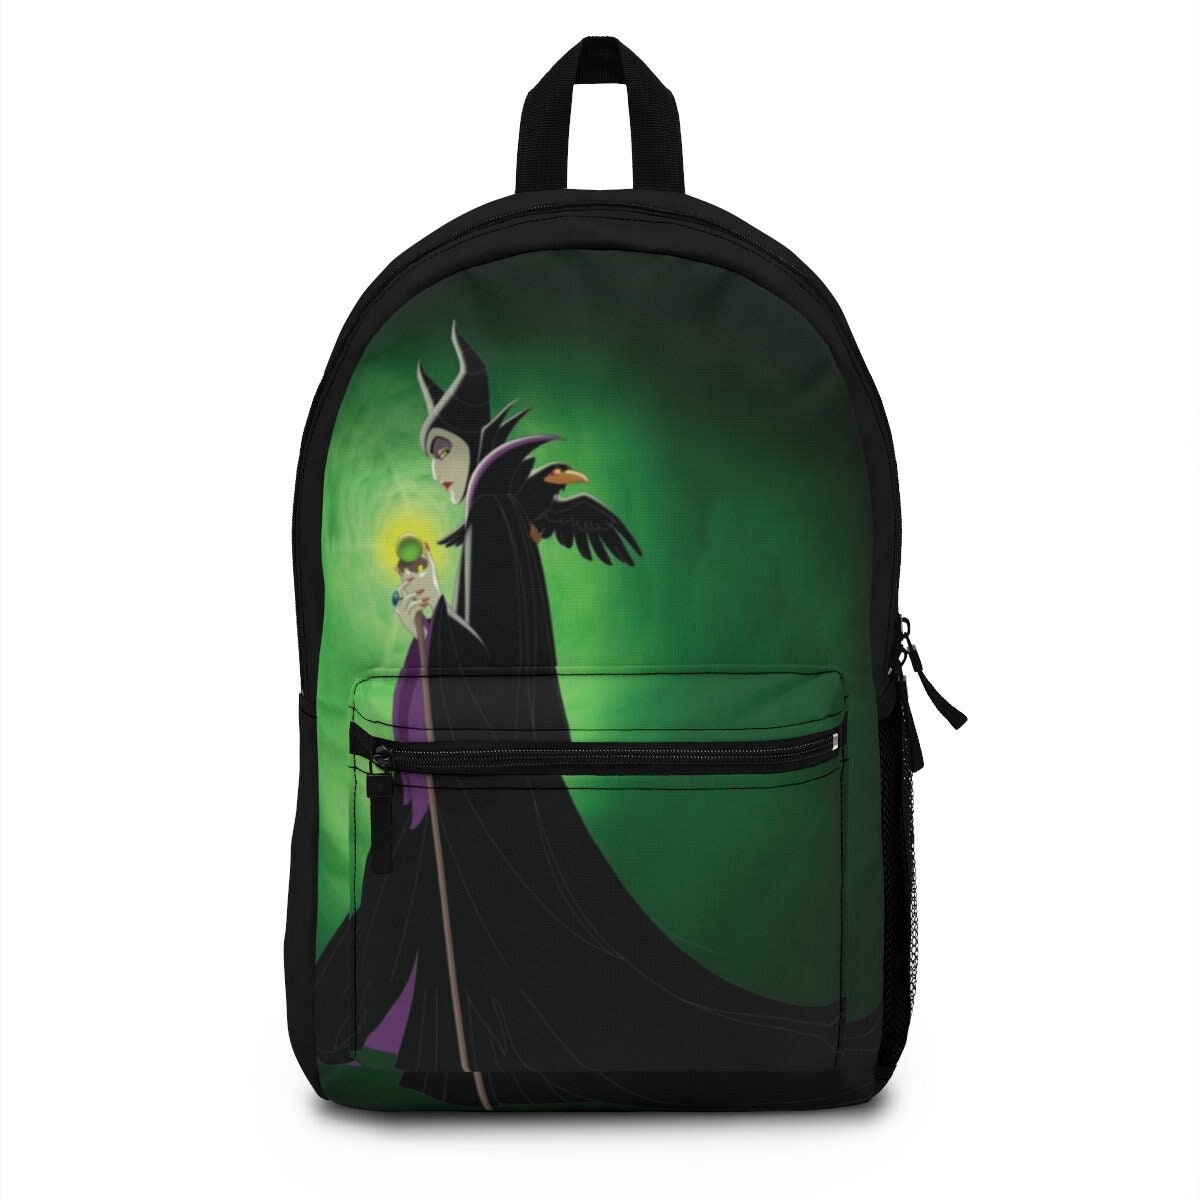 Disney Maleficent Backpack Bag Loungefly Cosplay Witch Queen